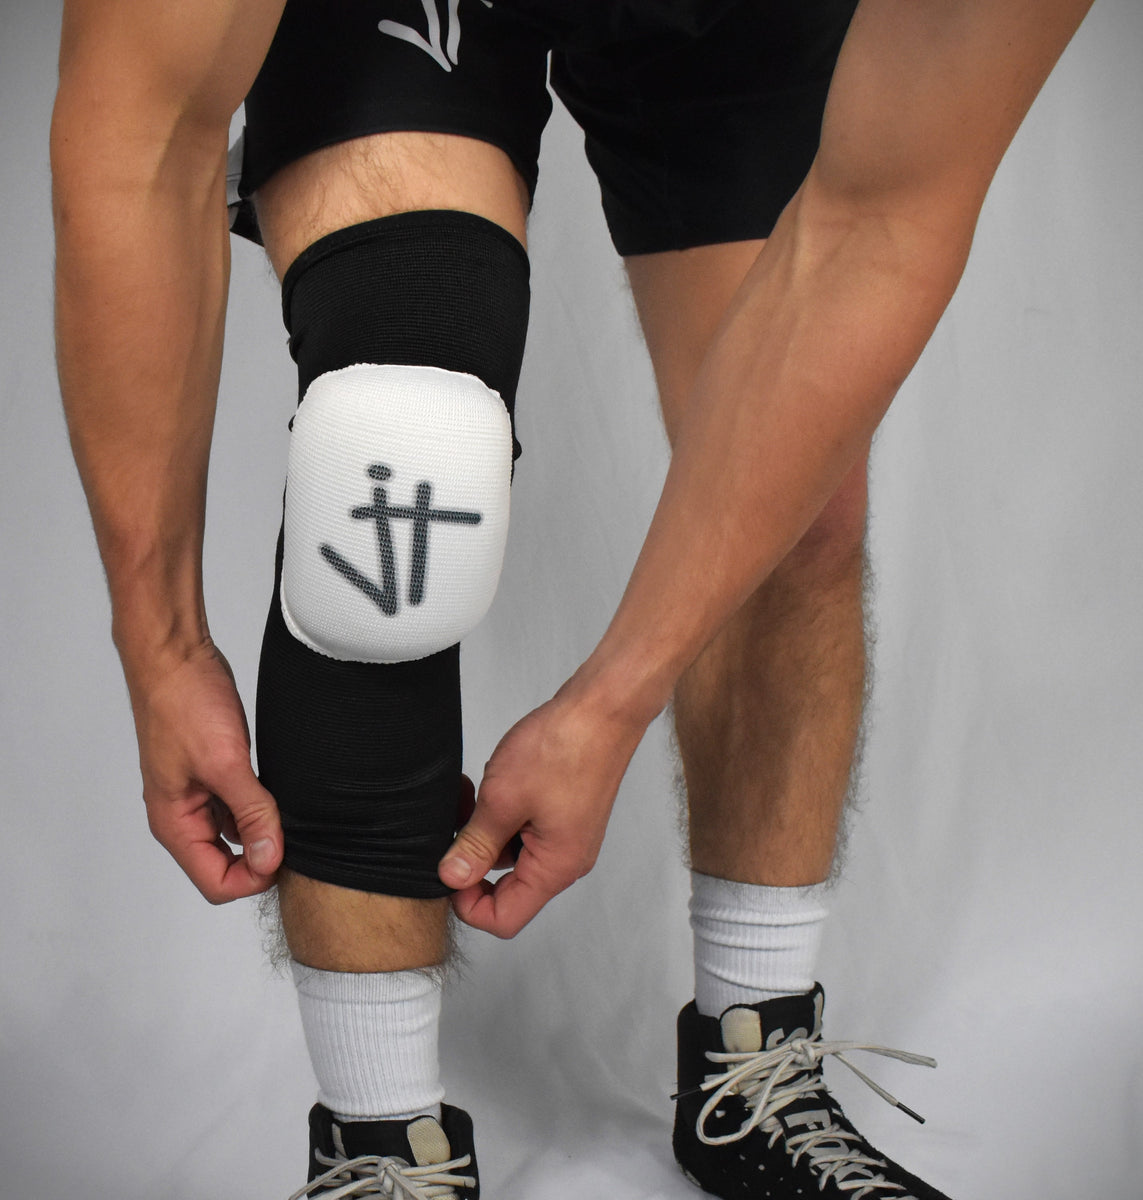 JT Bubble Sleeve Knee Pad (available in 4 colors) – JT-GEAR